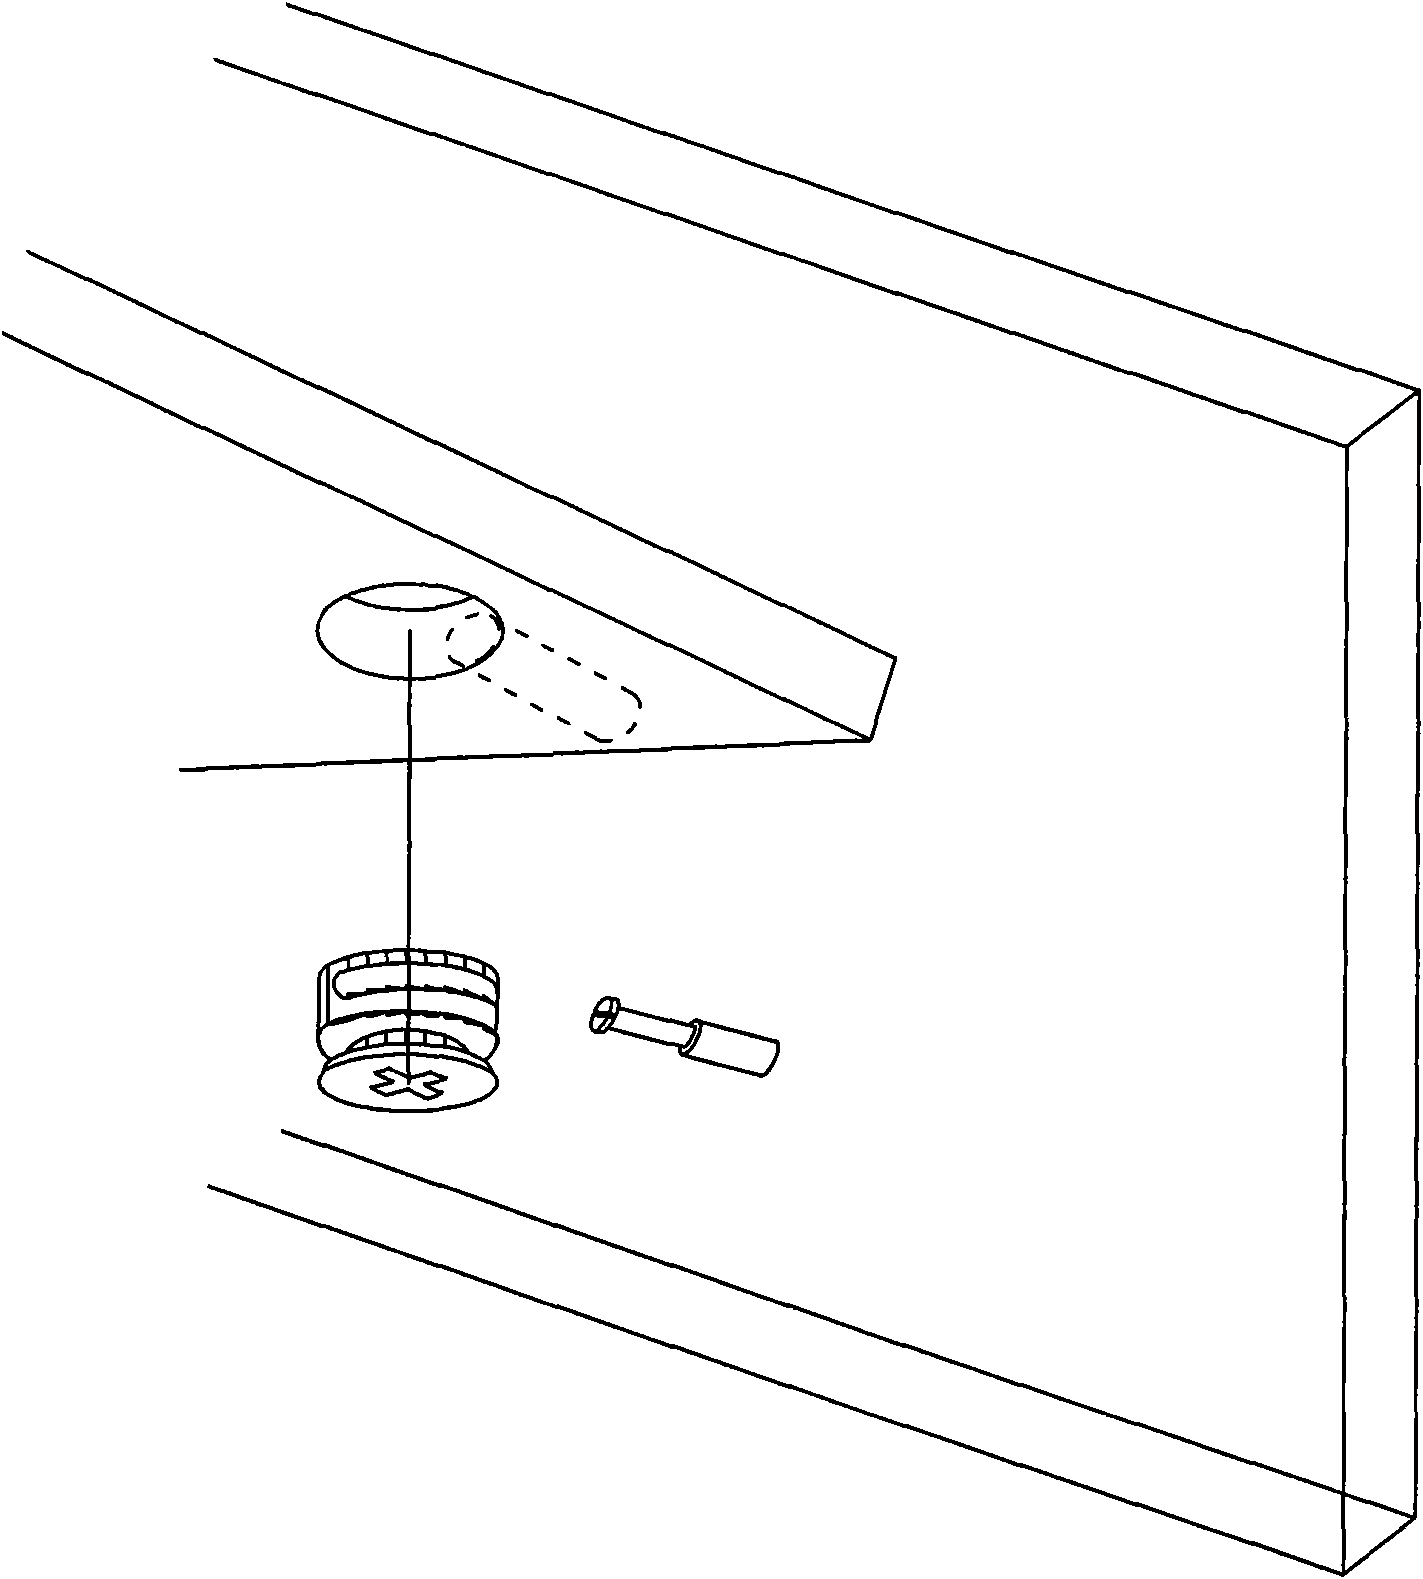 Connection fitting of household product